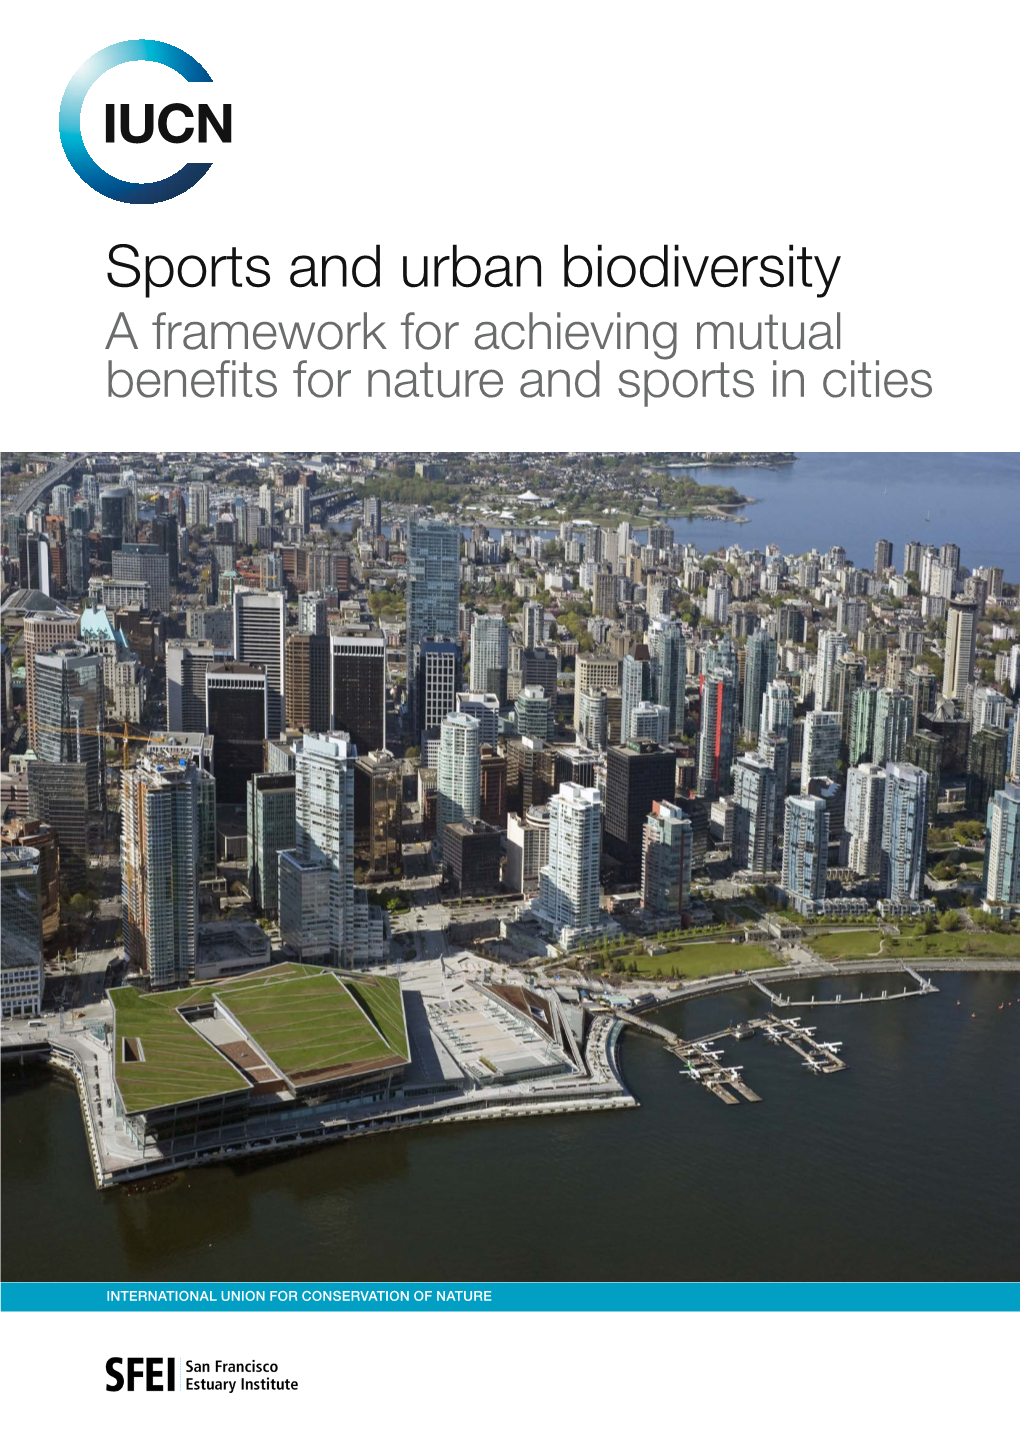 Sports and Urban Biodiversity a Framework for Achieving Mutual Benefits for Nature and Sports in Cities